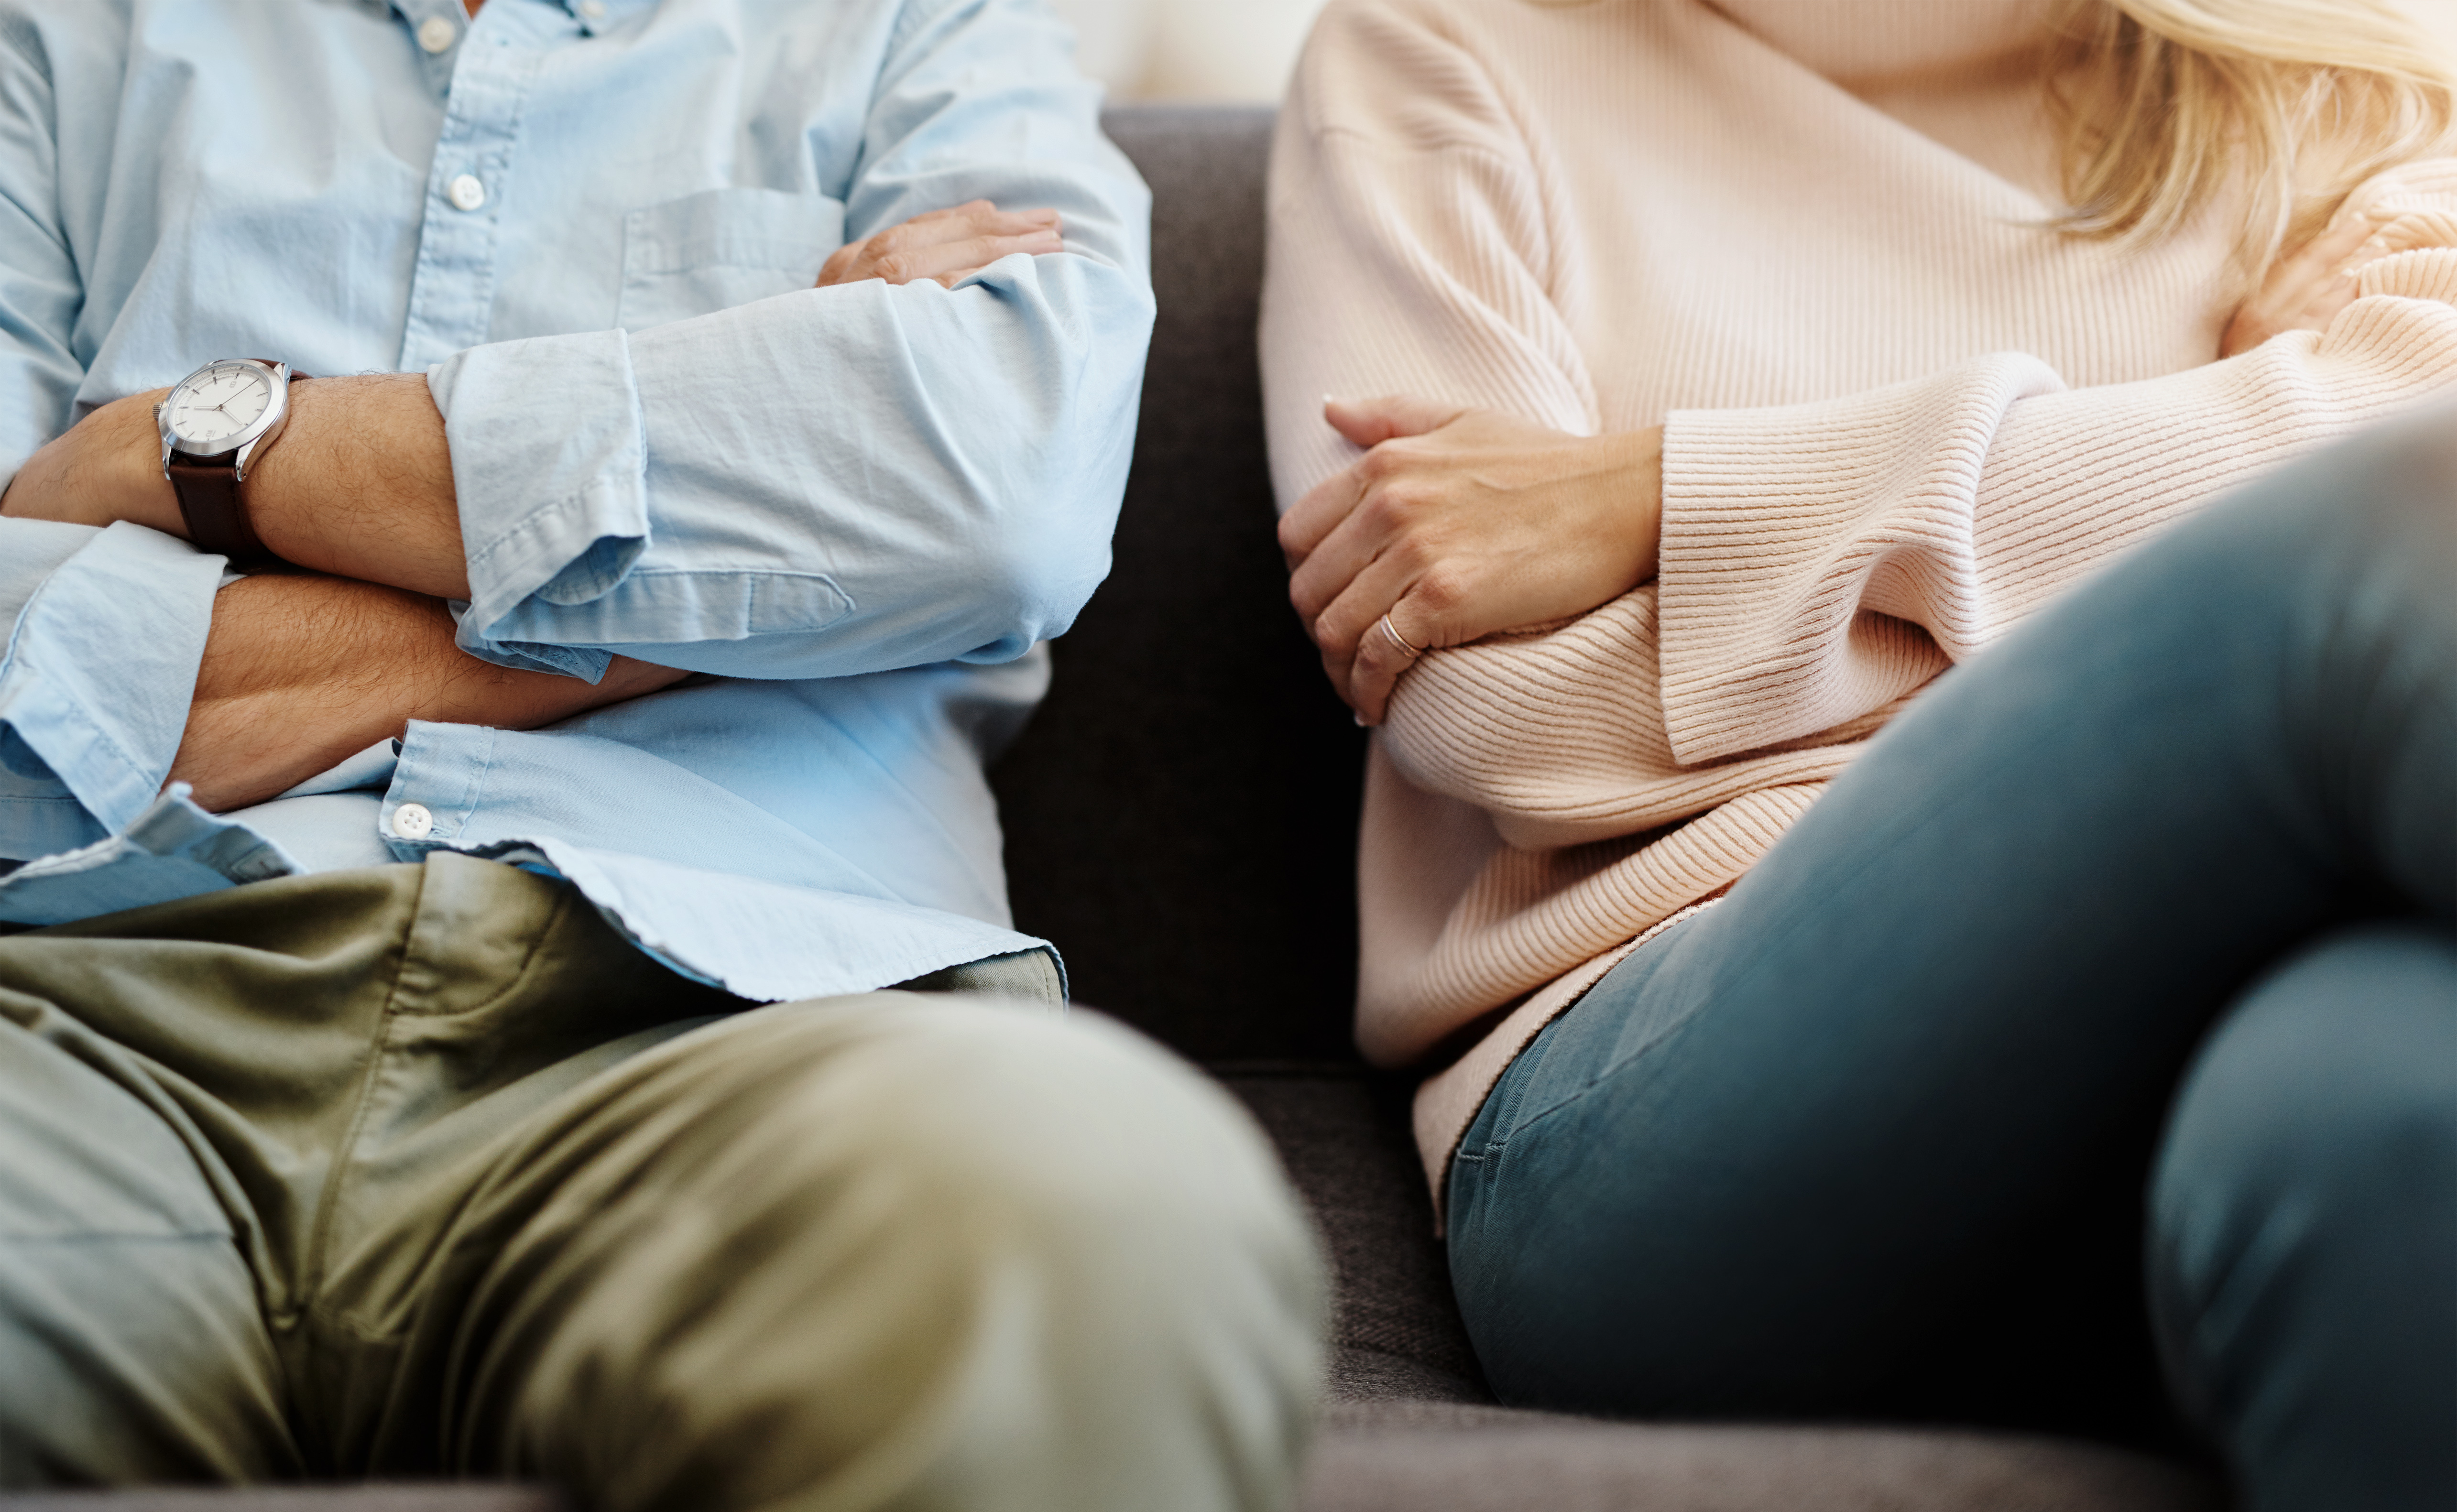 Couple sitting apart after arguing | Source: Getty Images